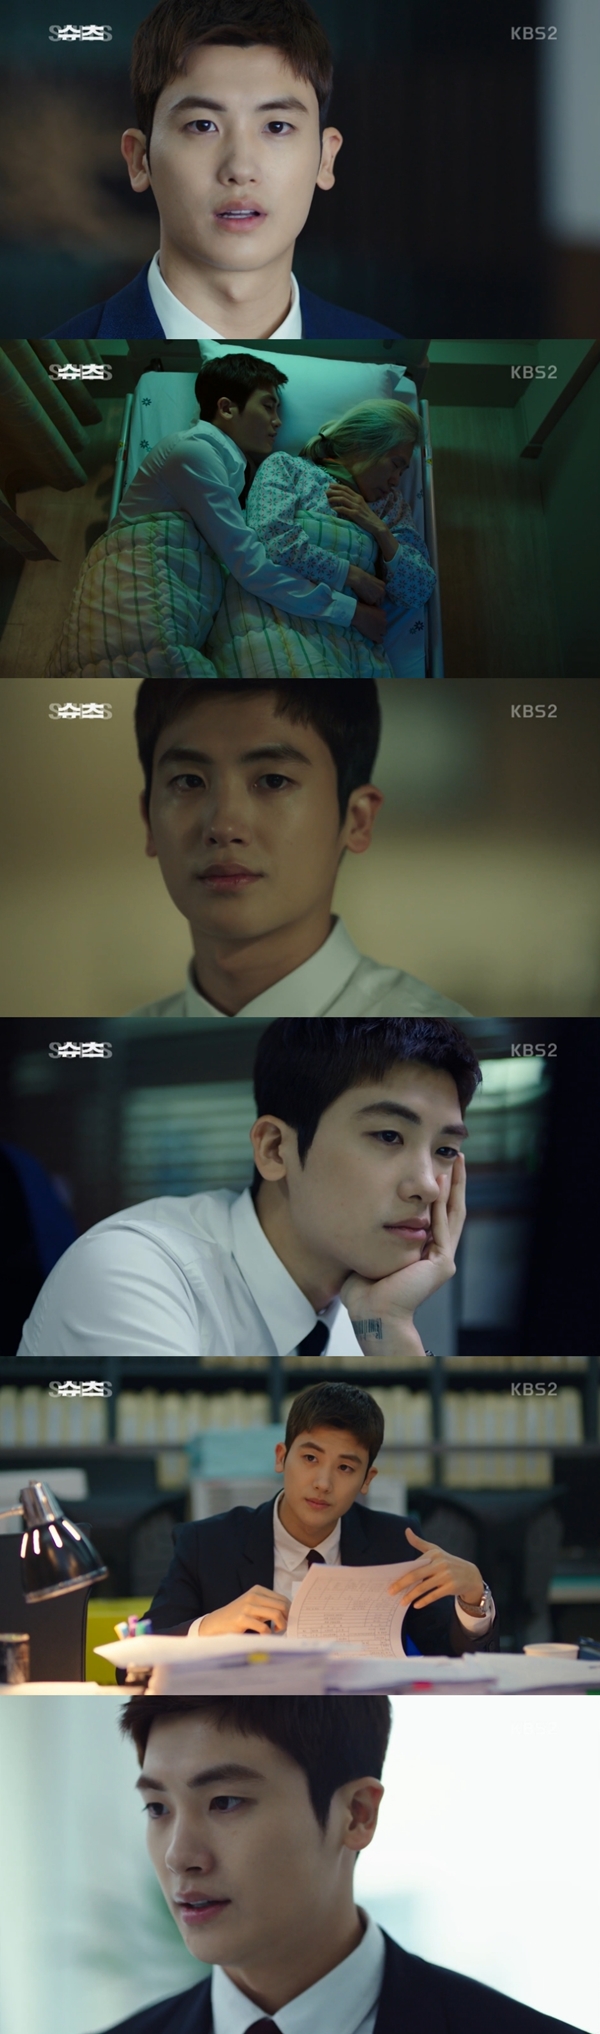 Suits fake lawyer Park Hyung-sik, I want to cheer him up. From a young age, a lawyer was a dream, and had the ability to be, but the world never gave him a chance.There was a chance for him to be a miracle.Actor Park Hyung-sik played the role of Ko Yeon-woo, a fake new lawyer in the KBS drama Suits (playplayed by Kim Jung-min, director Kim Jin-woo, and production monster union enter media Pictures).Ko Yeon-woo is a man with a genius memory that he never forgets when he sees and understands once, and a empathy ability to disarm his opponent.The story of Suits is the story of the opportunity of a fake lawyer in front of the door of a world where he rarely opens.He is a man of two abilities that are difficult to have only one. He has the charm of stealing his eyes.It is also true that even the main character of the drama can have such a perfect and enviable character.However, Ko Yeon-woo brings the audience a consensus that they want to cheer up rather than the gap of different from me. In the second episode of Suits, which was broadcast on the 26th, the special aspect of such a character, Park Hyung-sik, was more intensely touched.On this day, Ko Yeon-woo made his first commute as a fake new lawyer.As soon as he first came to work, he received a dismissal notice, but he survived the best law firm in Korea again due to the desperation of standing at the edge of the cliff. After that, Ko Yeon-woo was not a real lawyer, but he solved the situations given in his own way.He listened to his clients story and succeeded in wiggling and using the situation cleverly.The appearance of Ko Yeon-woo, who had nothing in his condition for the title of lawyer, was awkward but faced with the problem and solved it, giving viewers a thrilling pleasure and surrogate satisfaction. Park Hyung-sik is melting into Suits, containing both parts of the character, such as brightness, darkness, sharpness and softness.When his brain flashes, the exclamation of genius comes out.On the other hand, even though he is a friend who put himself in crisis, he can not be tough, or he visits a grandmother who is hospitalized and makes a person who sees him when he sleeps together in a narrow bed.